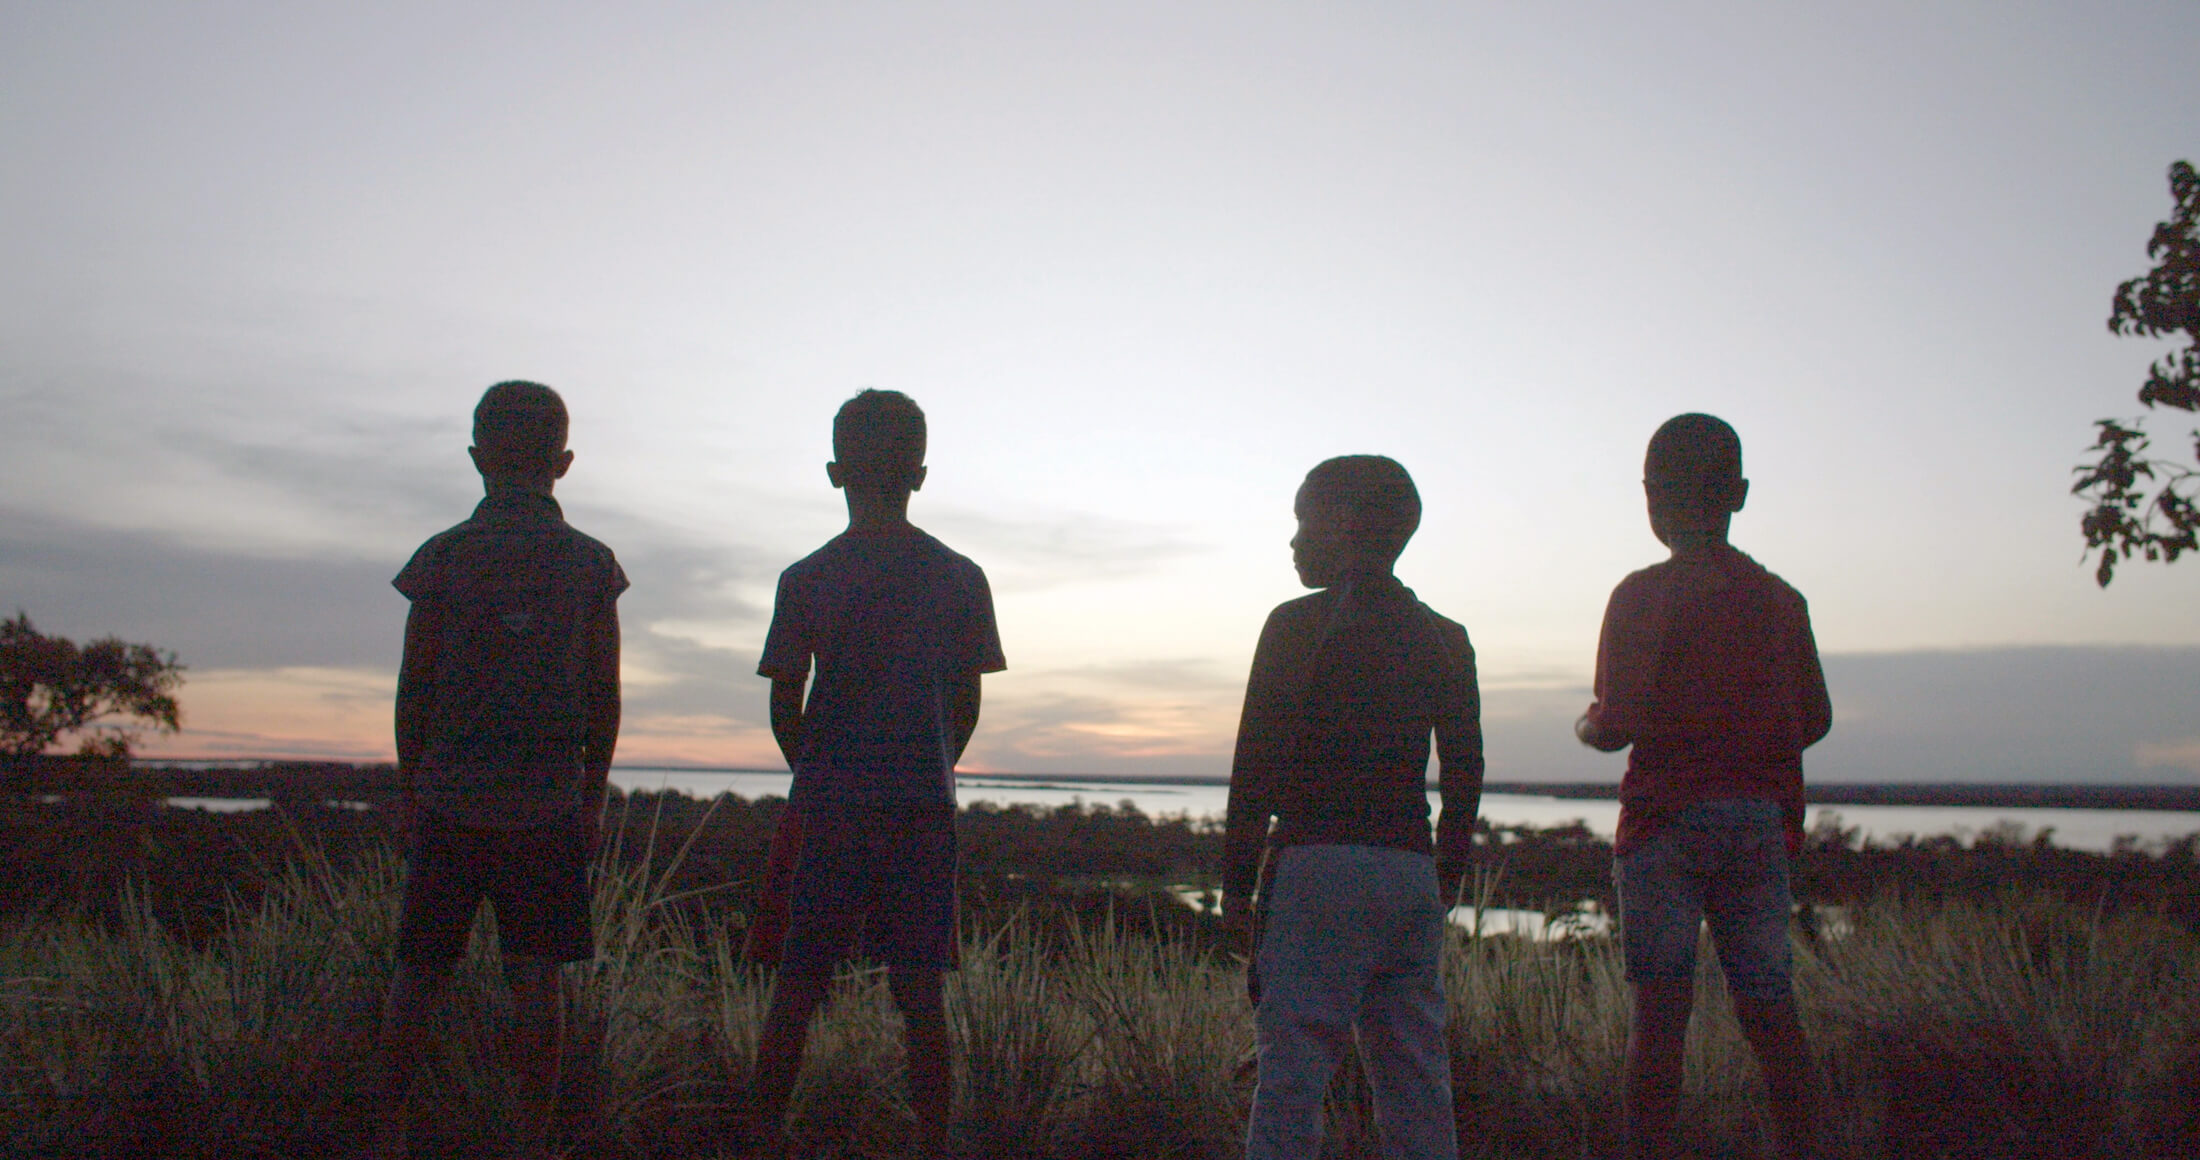 Children near Las Bombitas village play and watch the sunset over the Orinoco River.